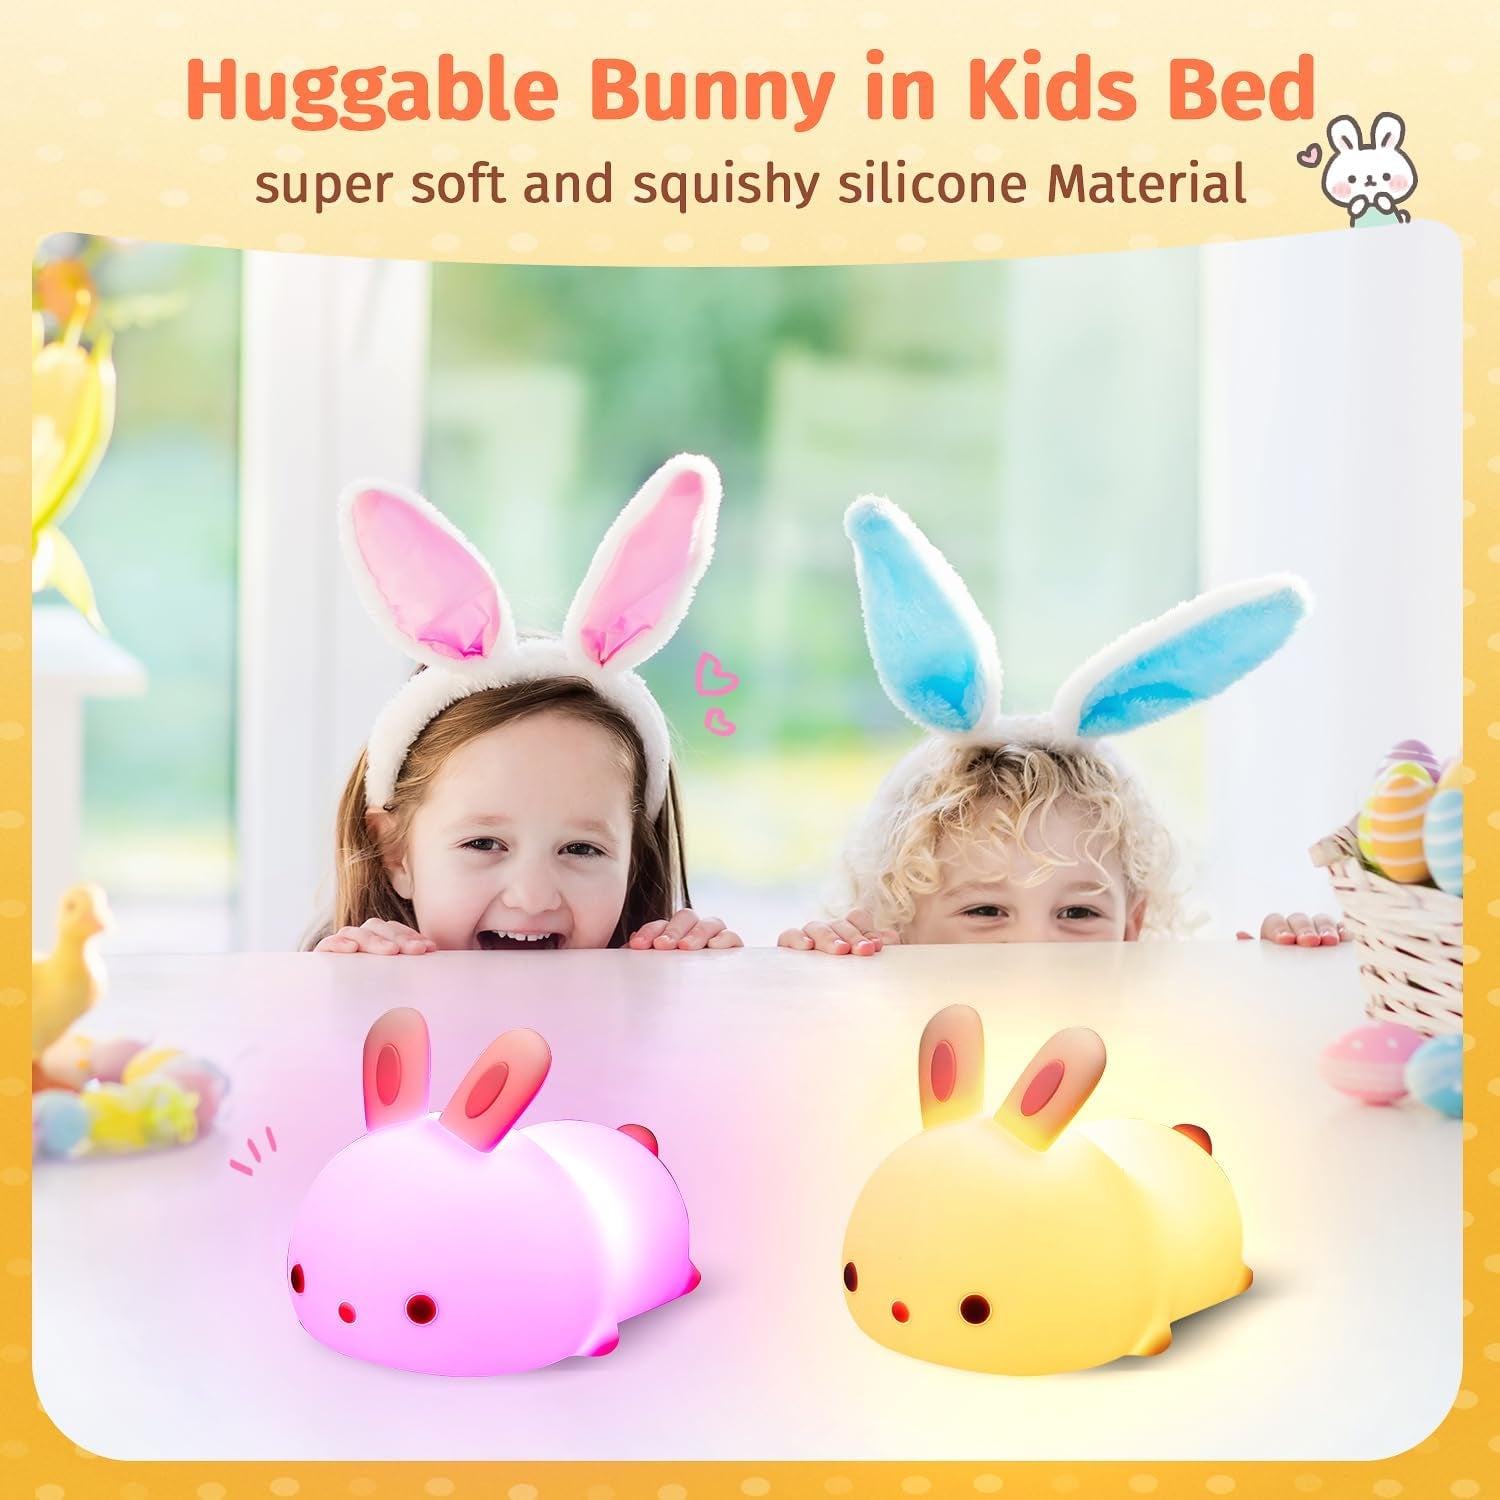 Cute Bunny Kids Night Light for Kids,16 Colors Kawaii Night Lights for Kids Room, Rechargeable Cute Lamp Baby Night Light,Tap FUN Cute Stuff for Teen Girls,Nightlights for Children Cute Gifts